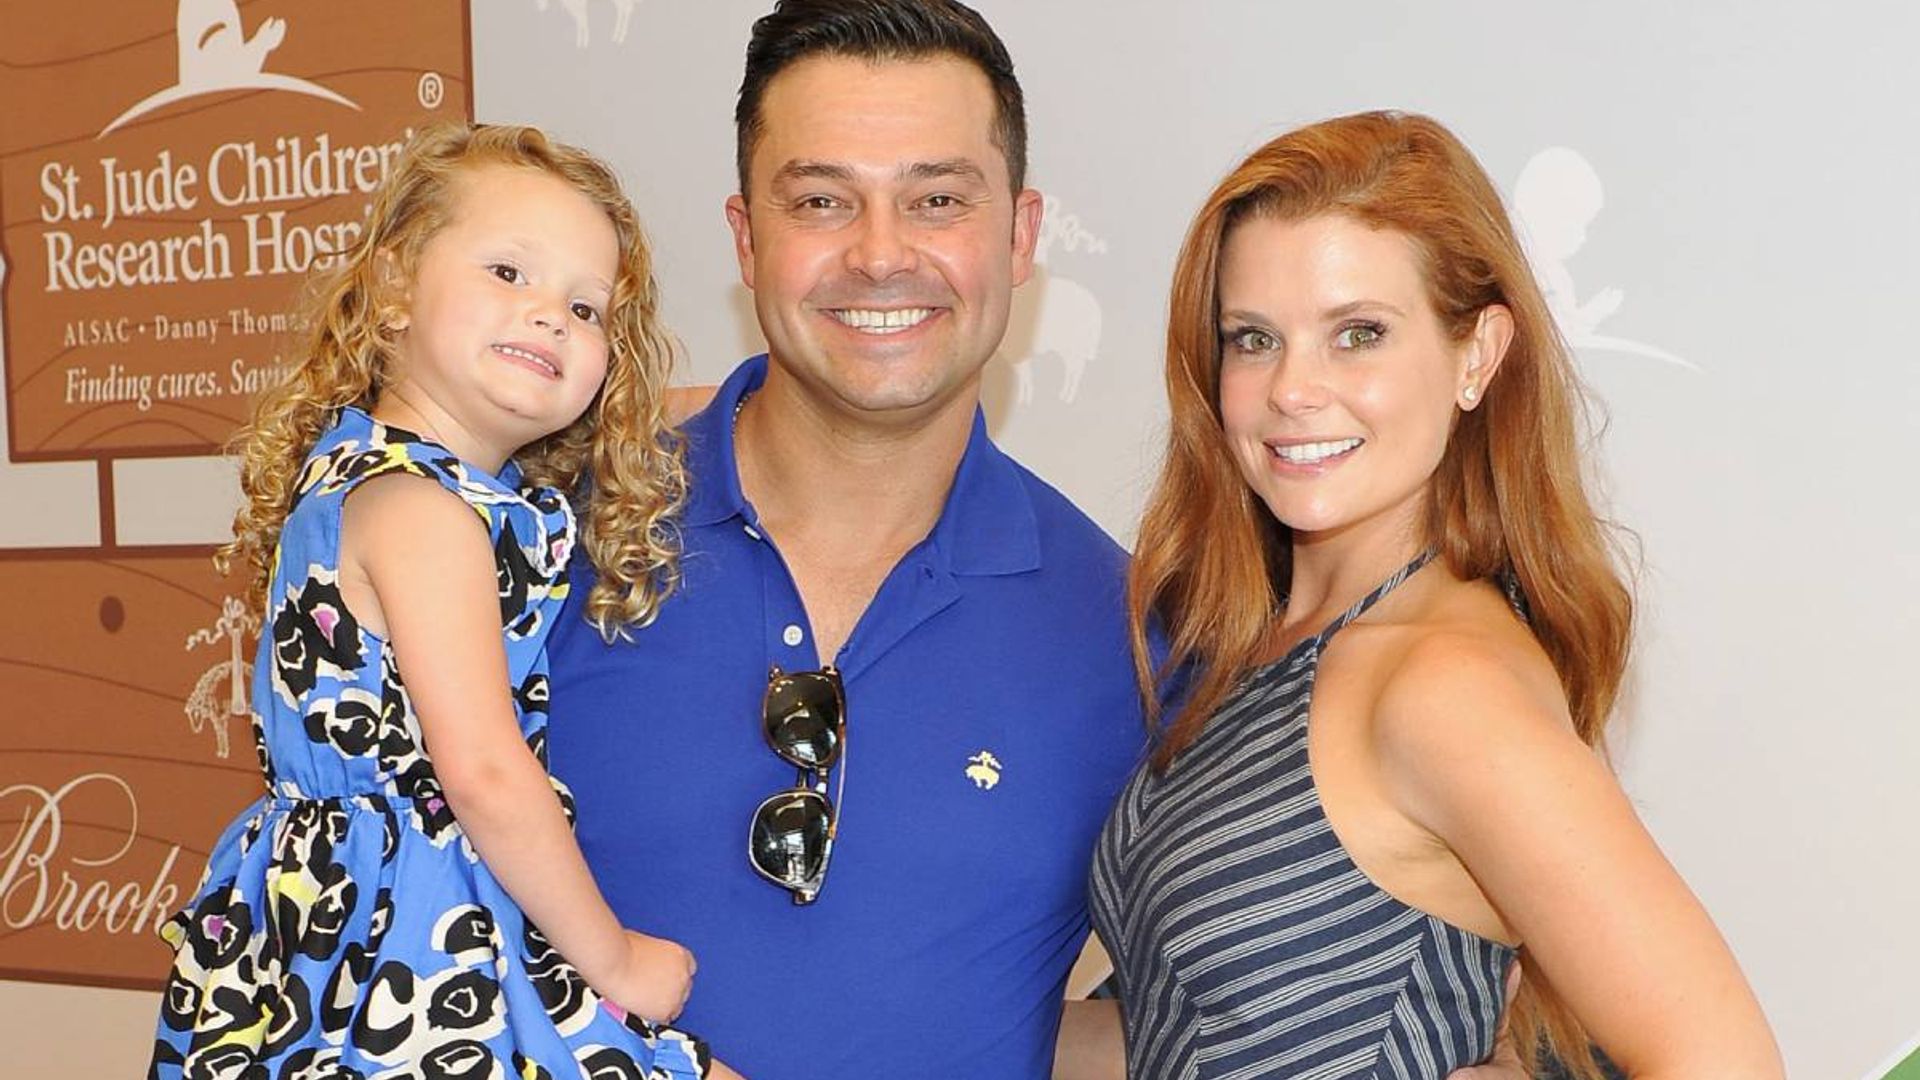 JoAnna Garcia Swisher's husband shows his support for her in the sweetest way